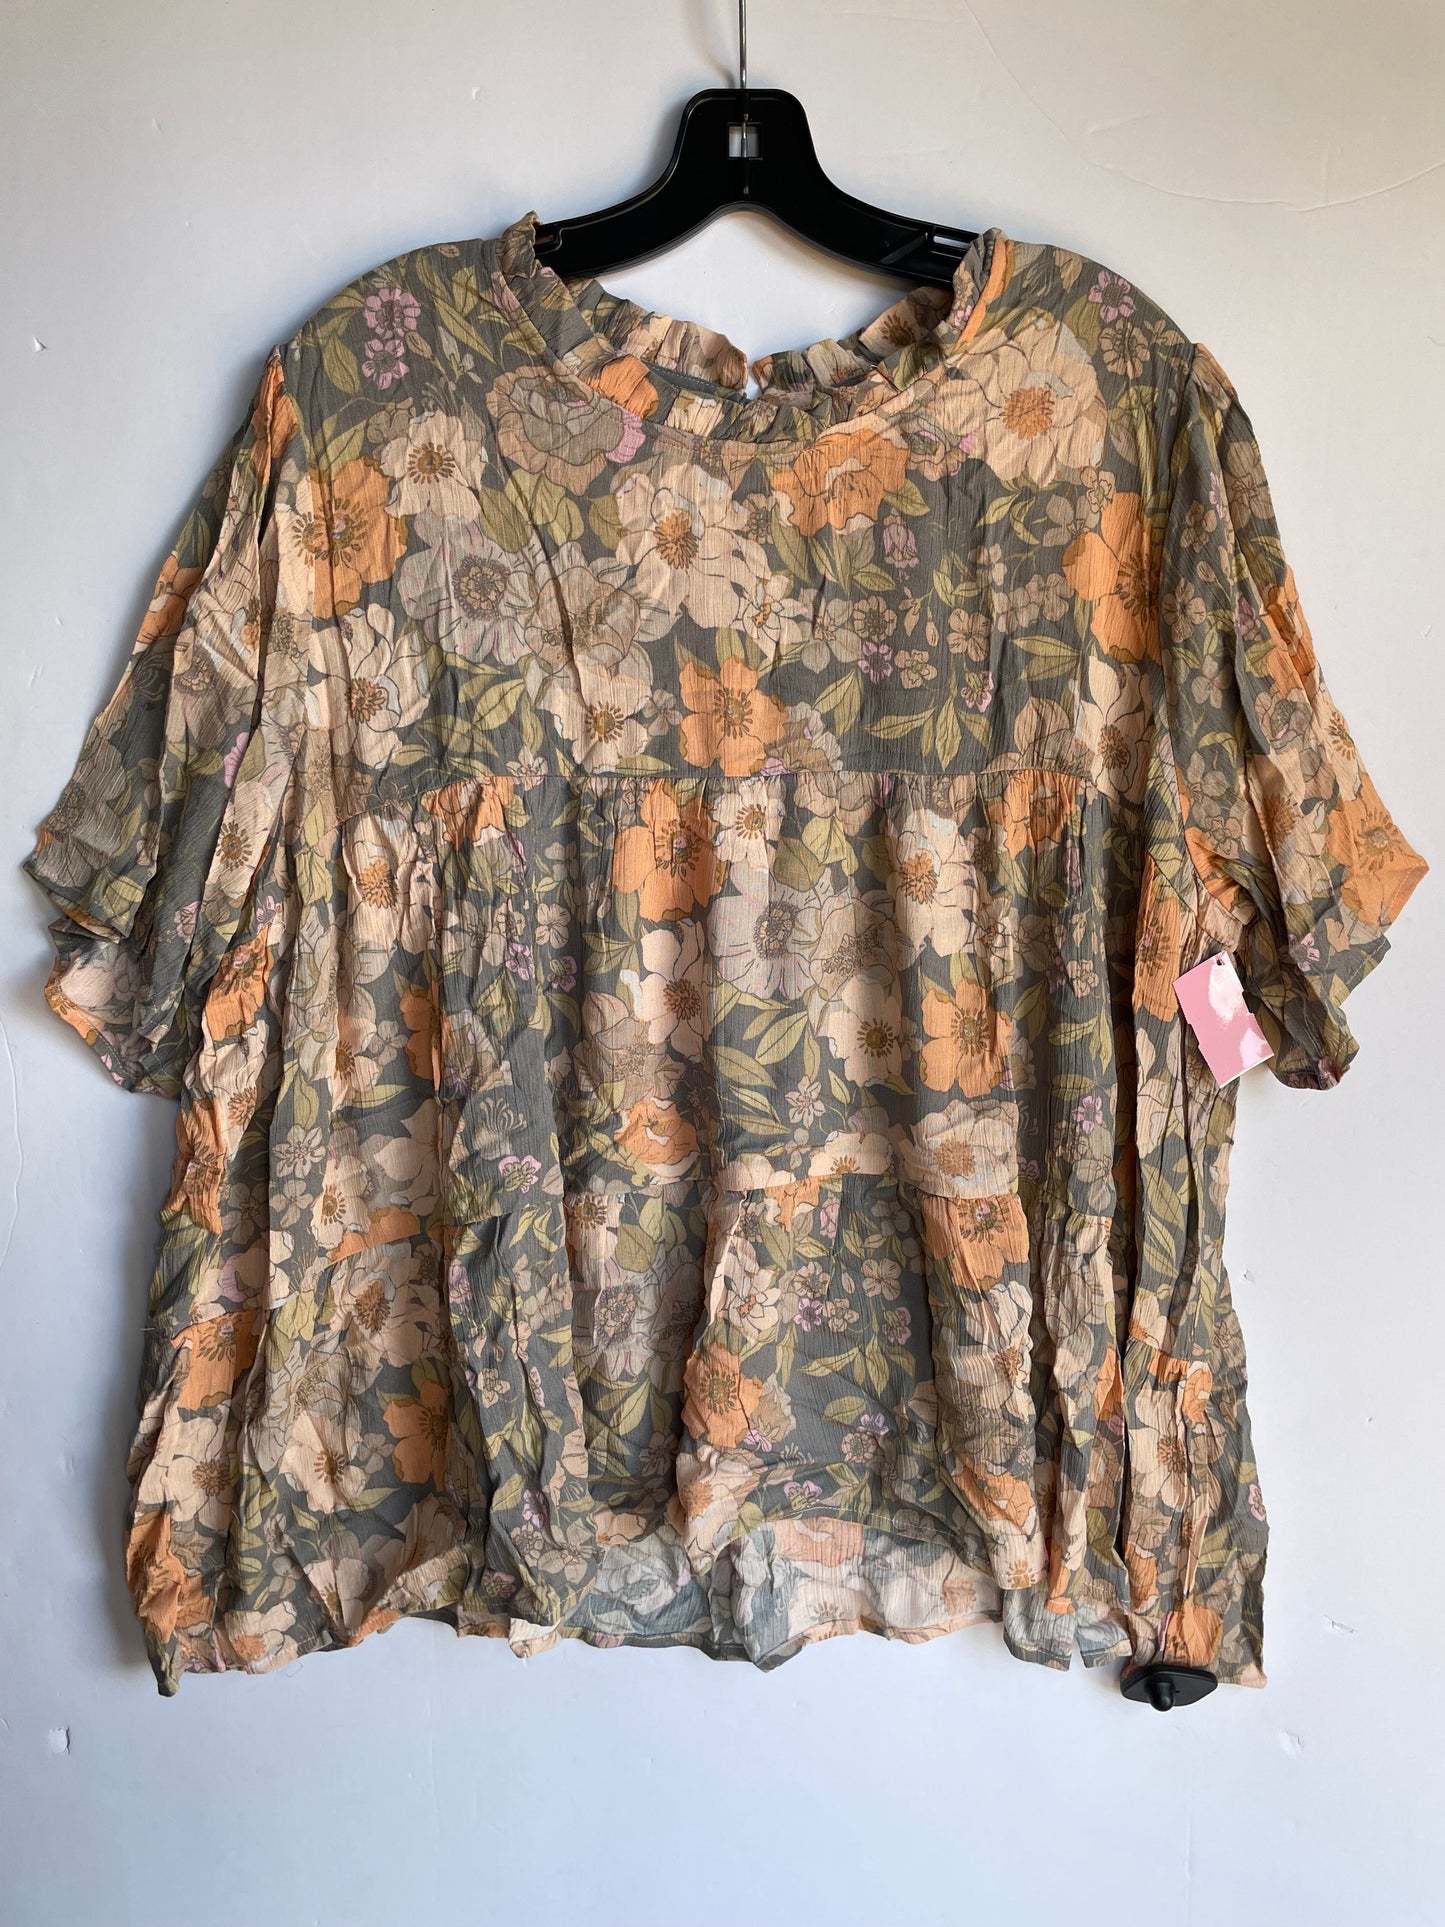 Floral Print Top Short Sleeve Clothes Mentor, Size 2x